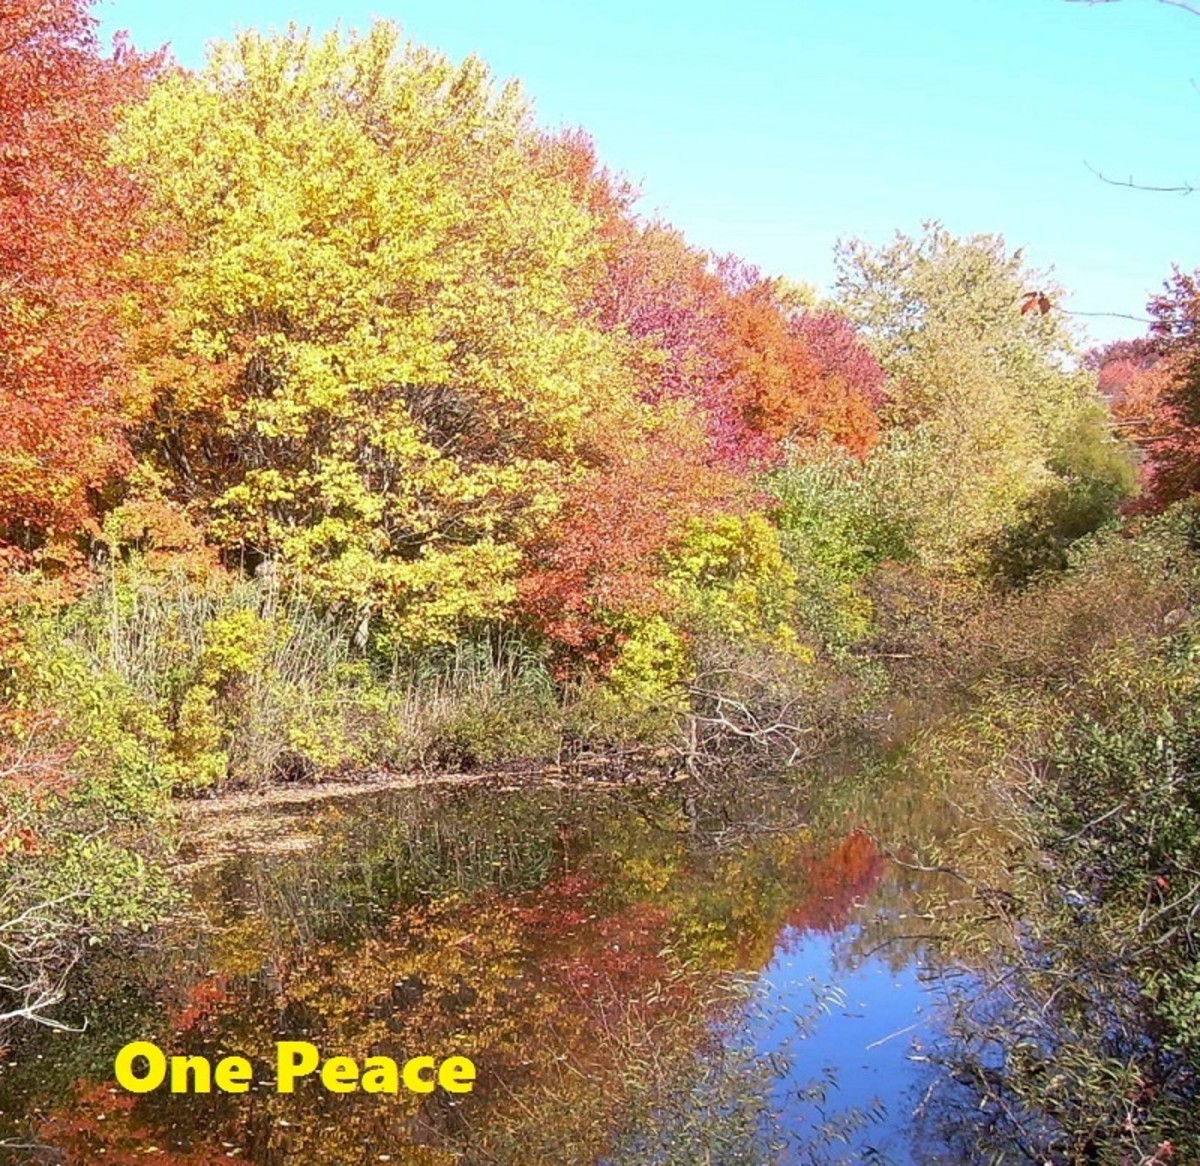 One Peace